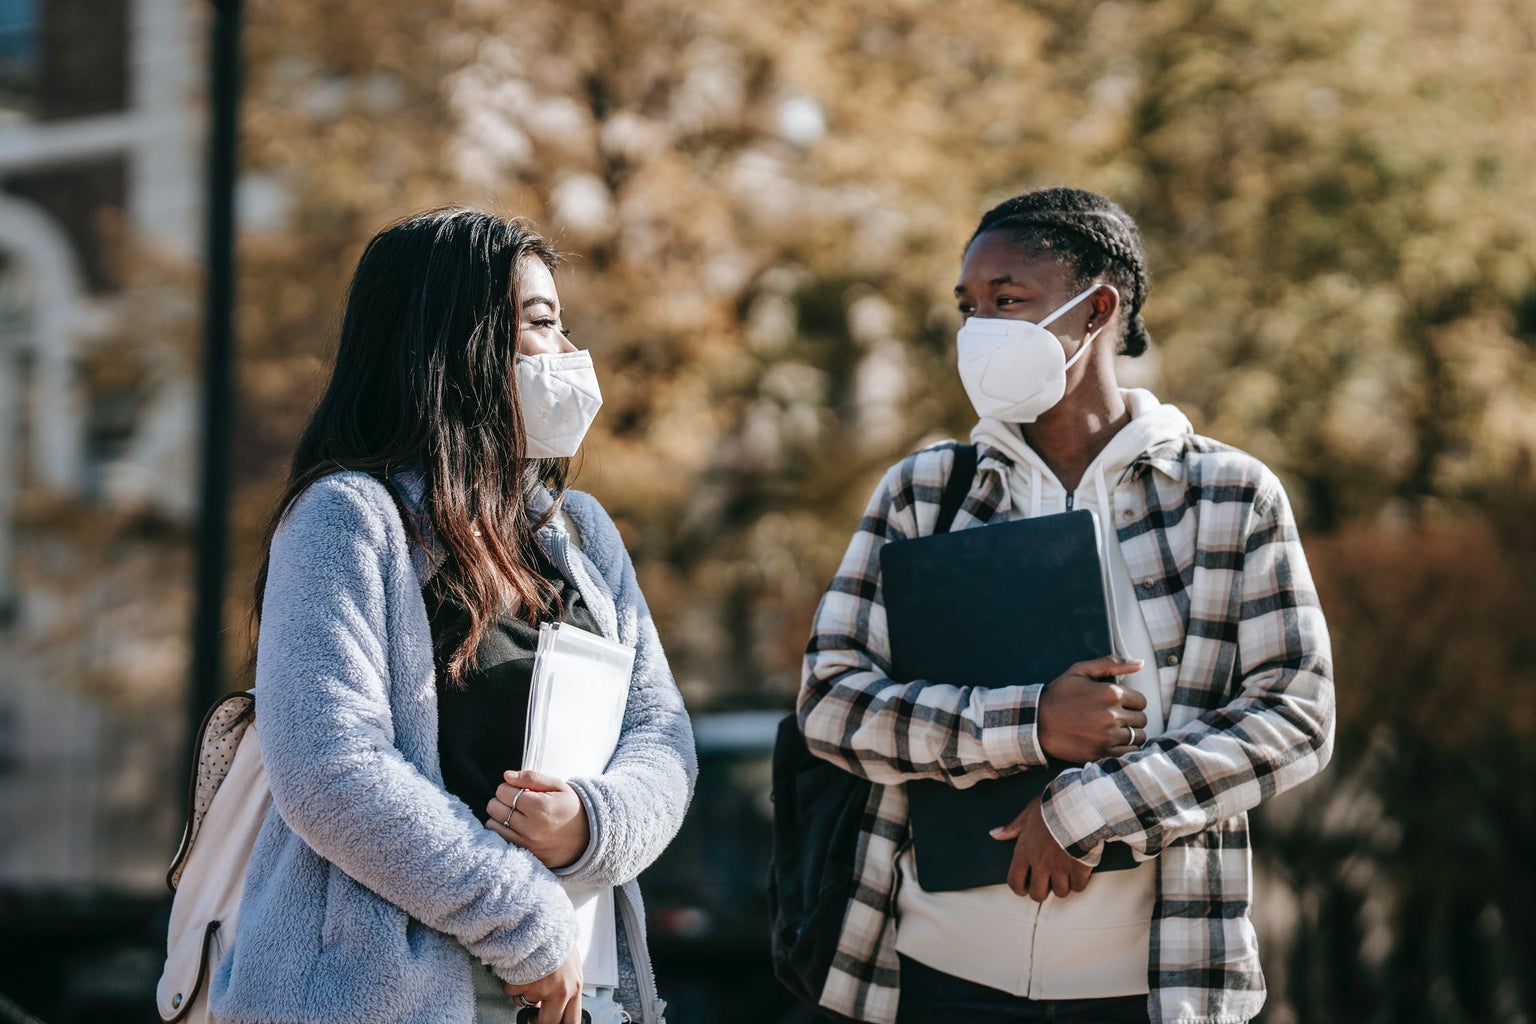 College students with masks walking across campus together.